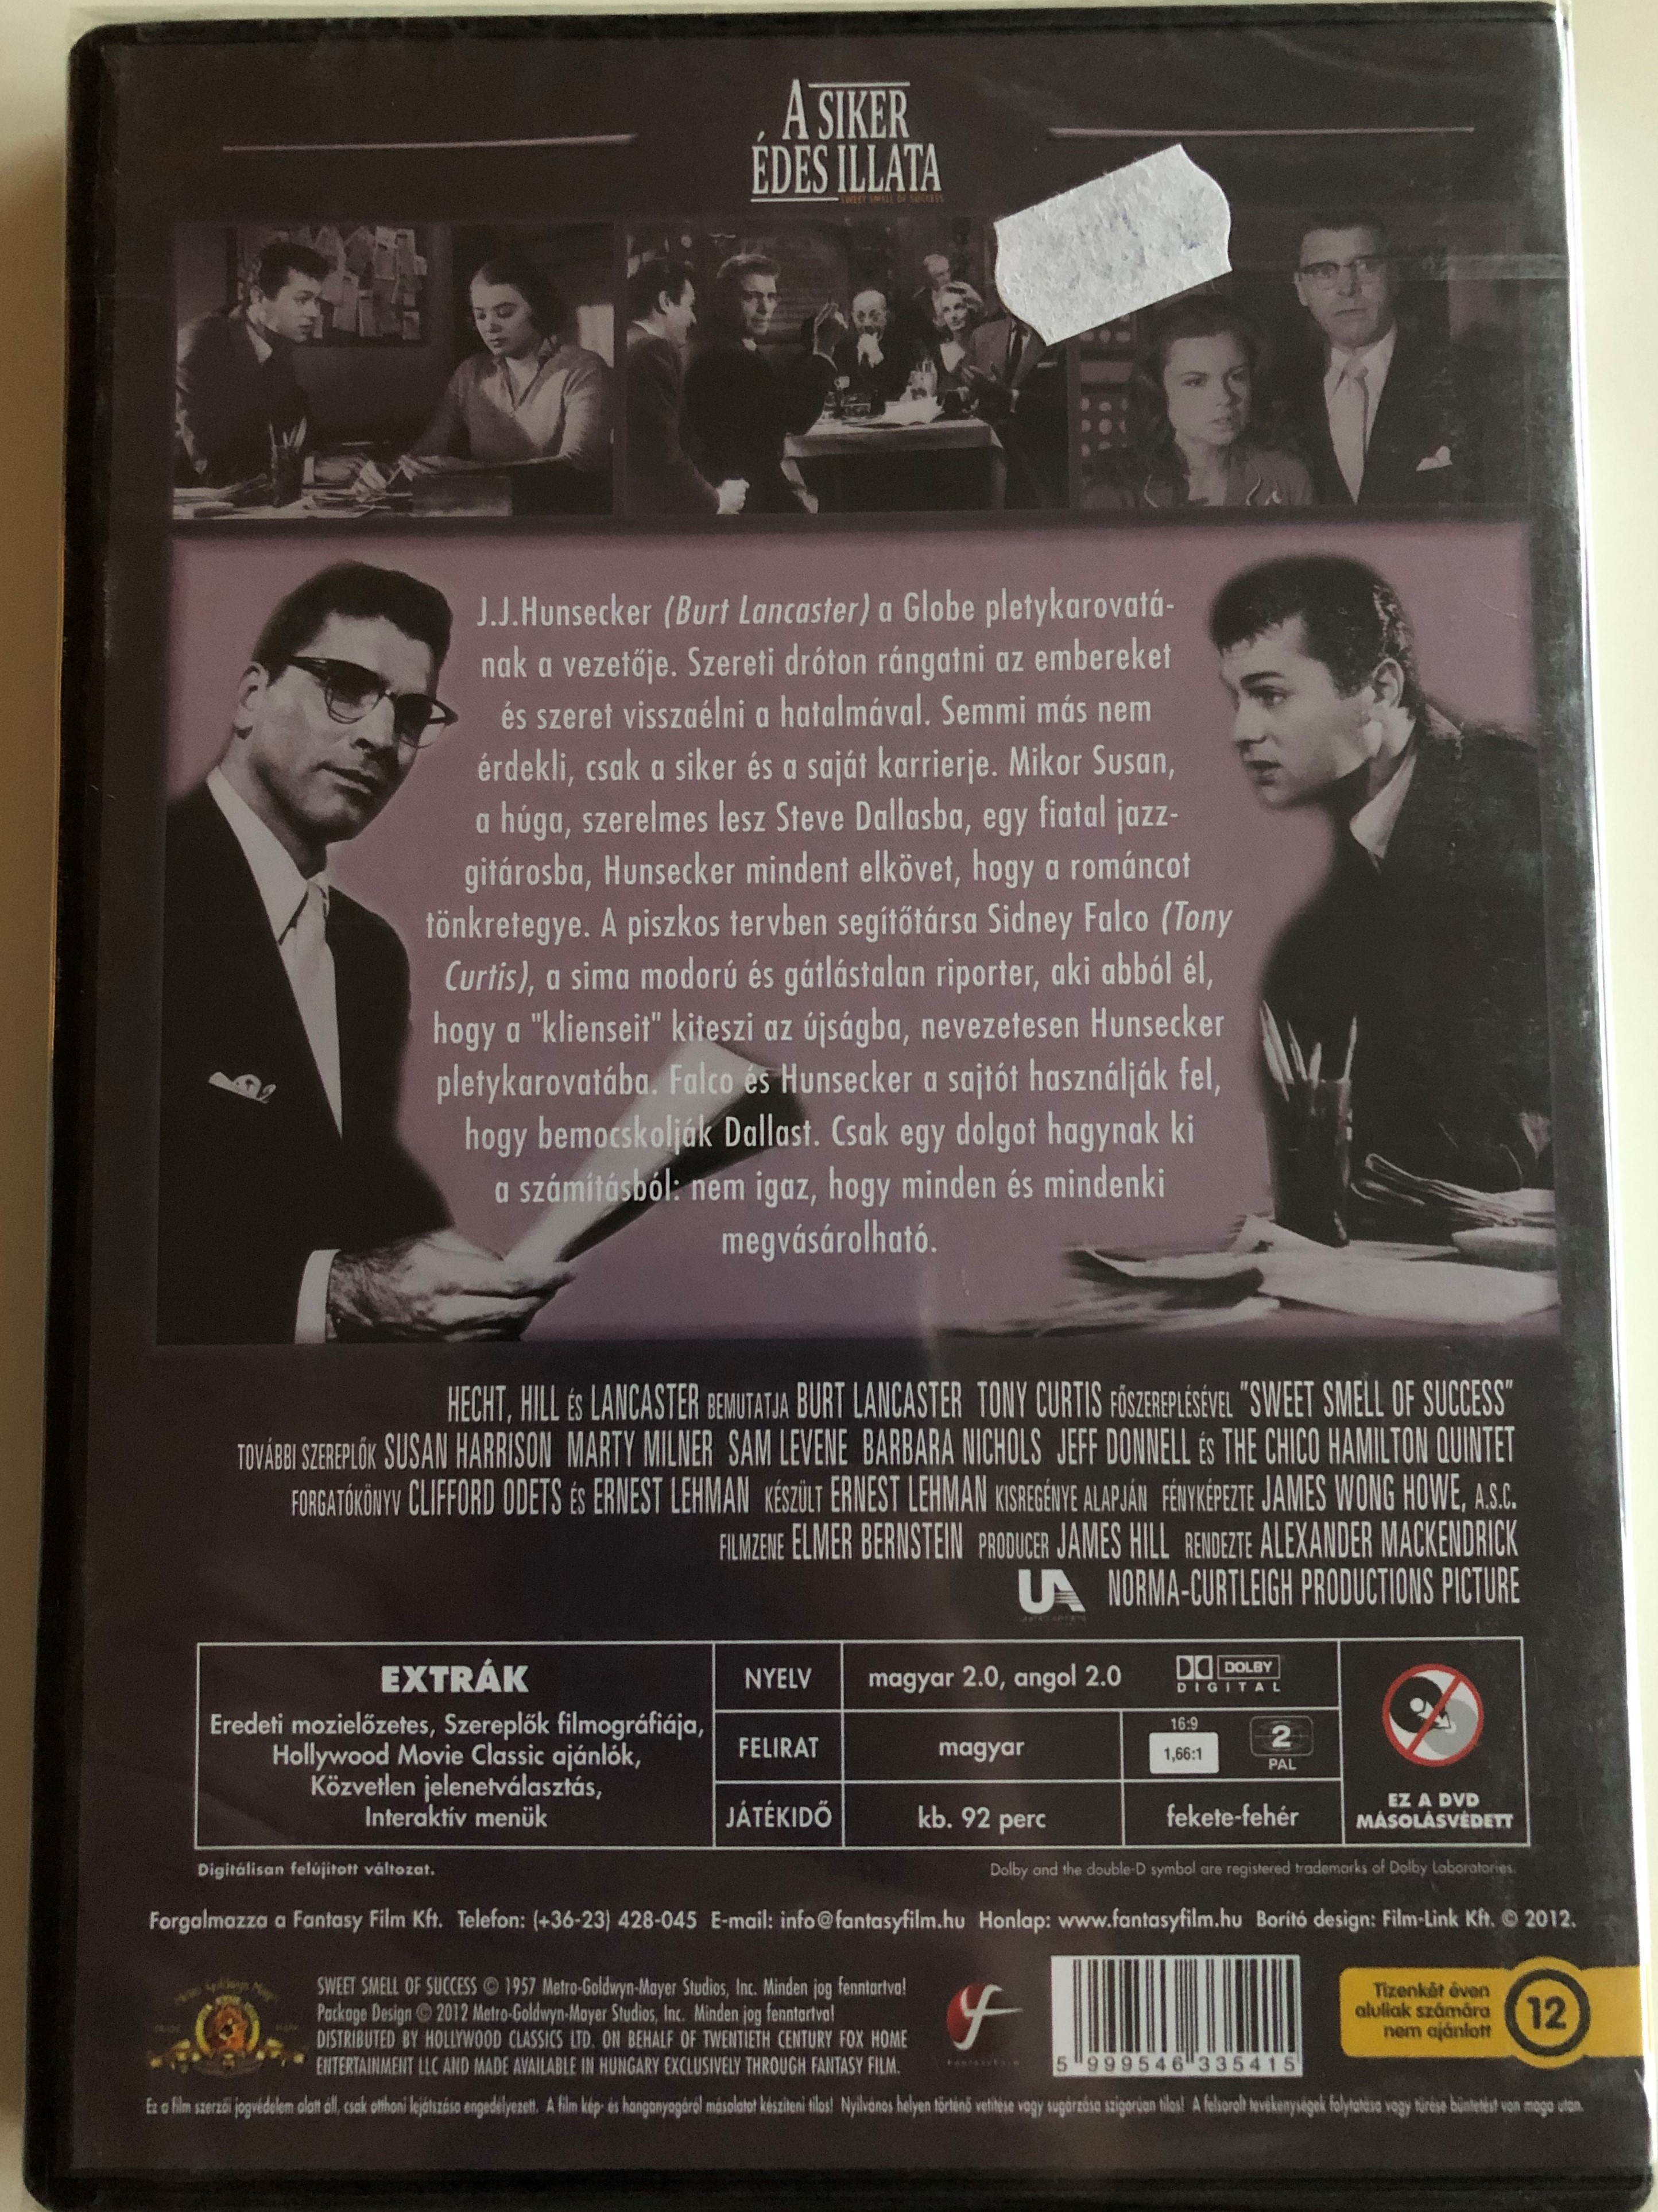 sweet-smell-of-success-dvd-1957-a-siker-edes-illata.png